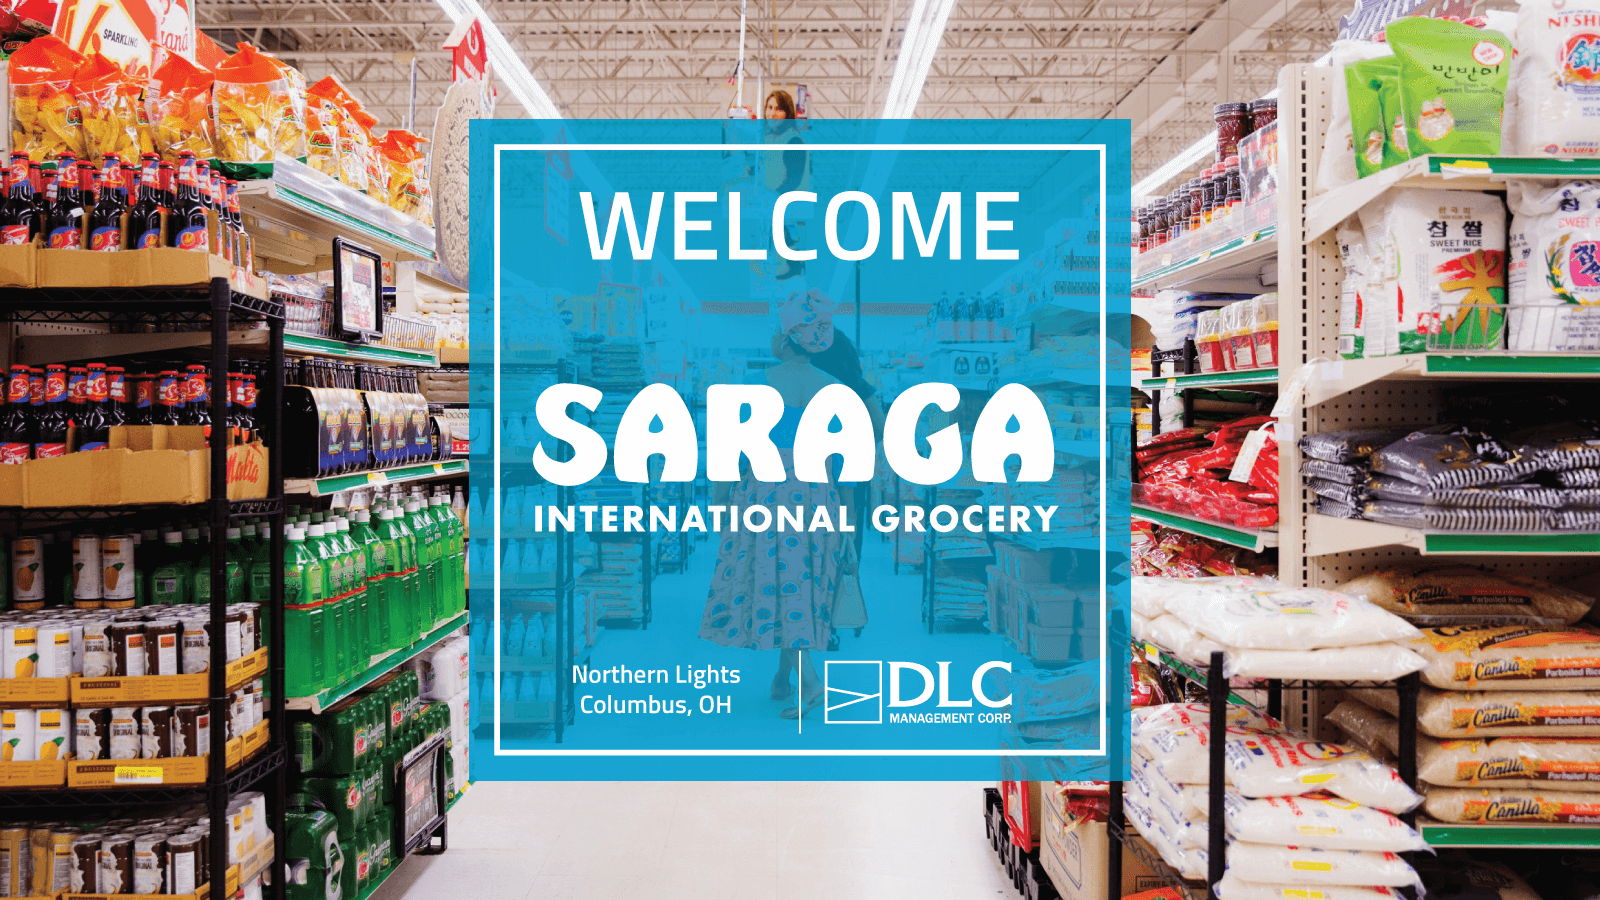 Grocery store aisle with a "Welcome Saraga International Grocery" graphic